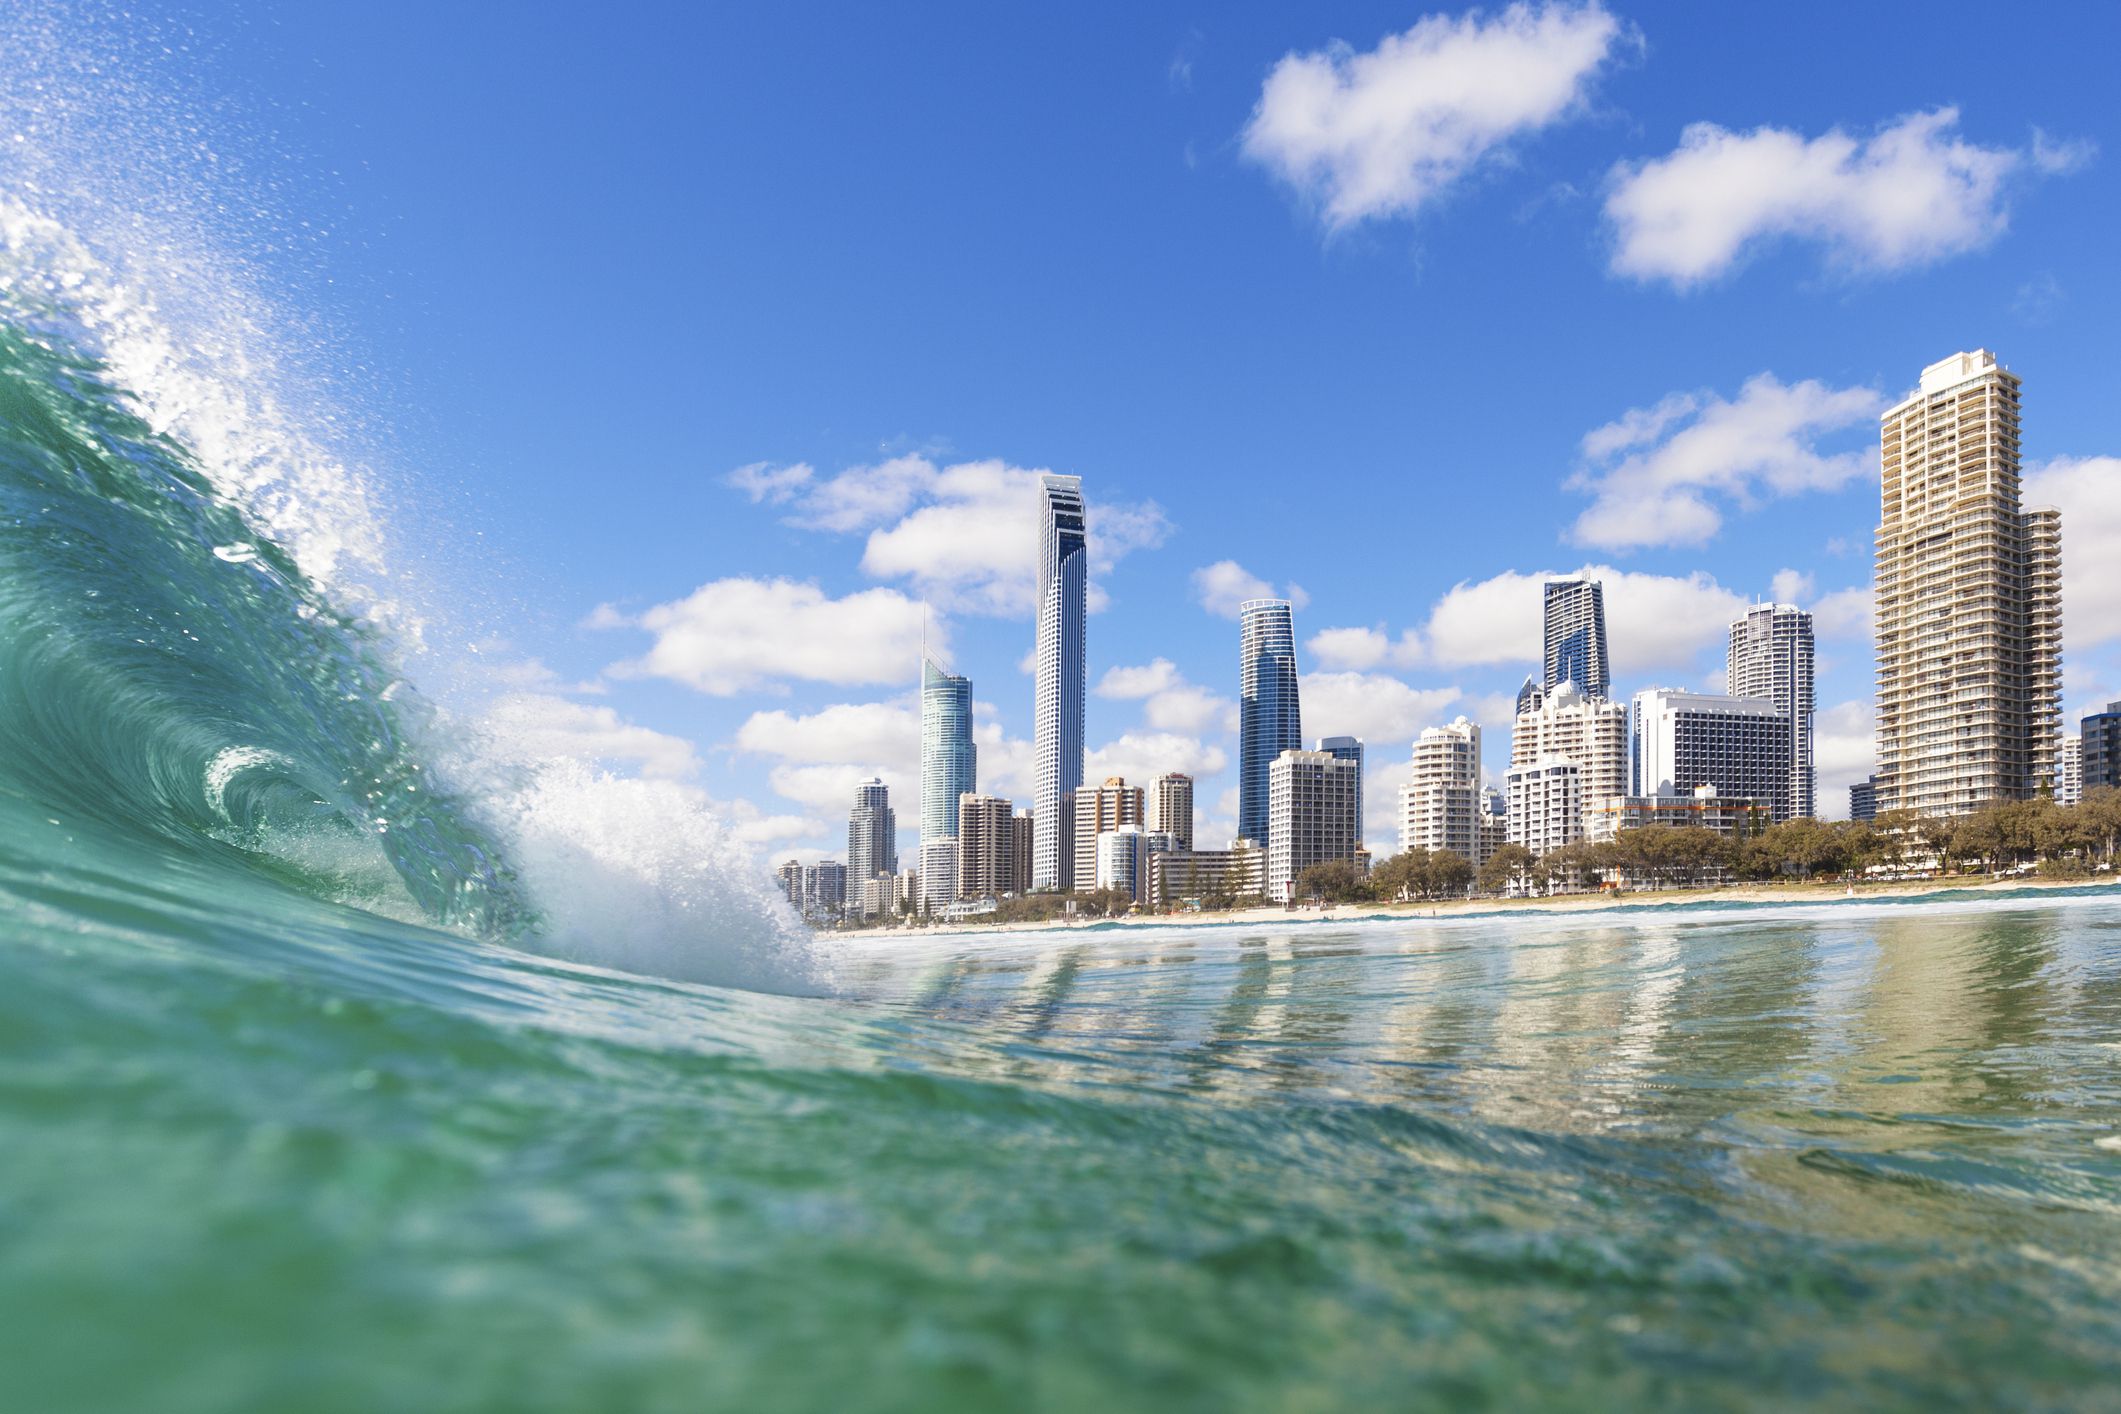 <p>Every year (well, pre-COVID), millions of surfers flock to the Gold Coast for its warm waters and trendy local cities. It’s also home to Hugh Jackman’s luxurious Gwinganna, a health retreat that has eco spas, seminars on wellness and organic food and other Instagram-worthy amenities. </p>